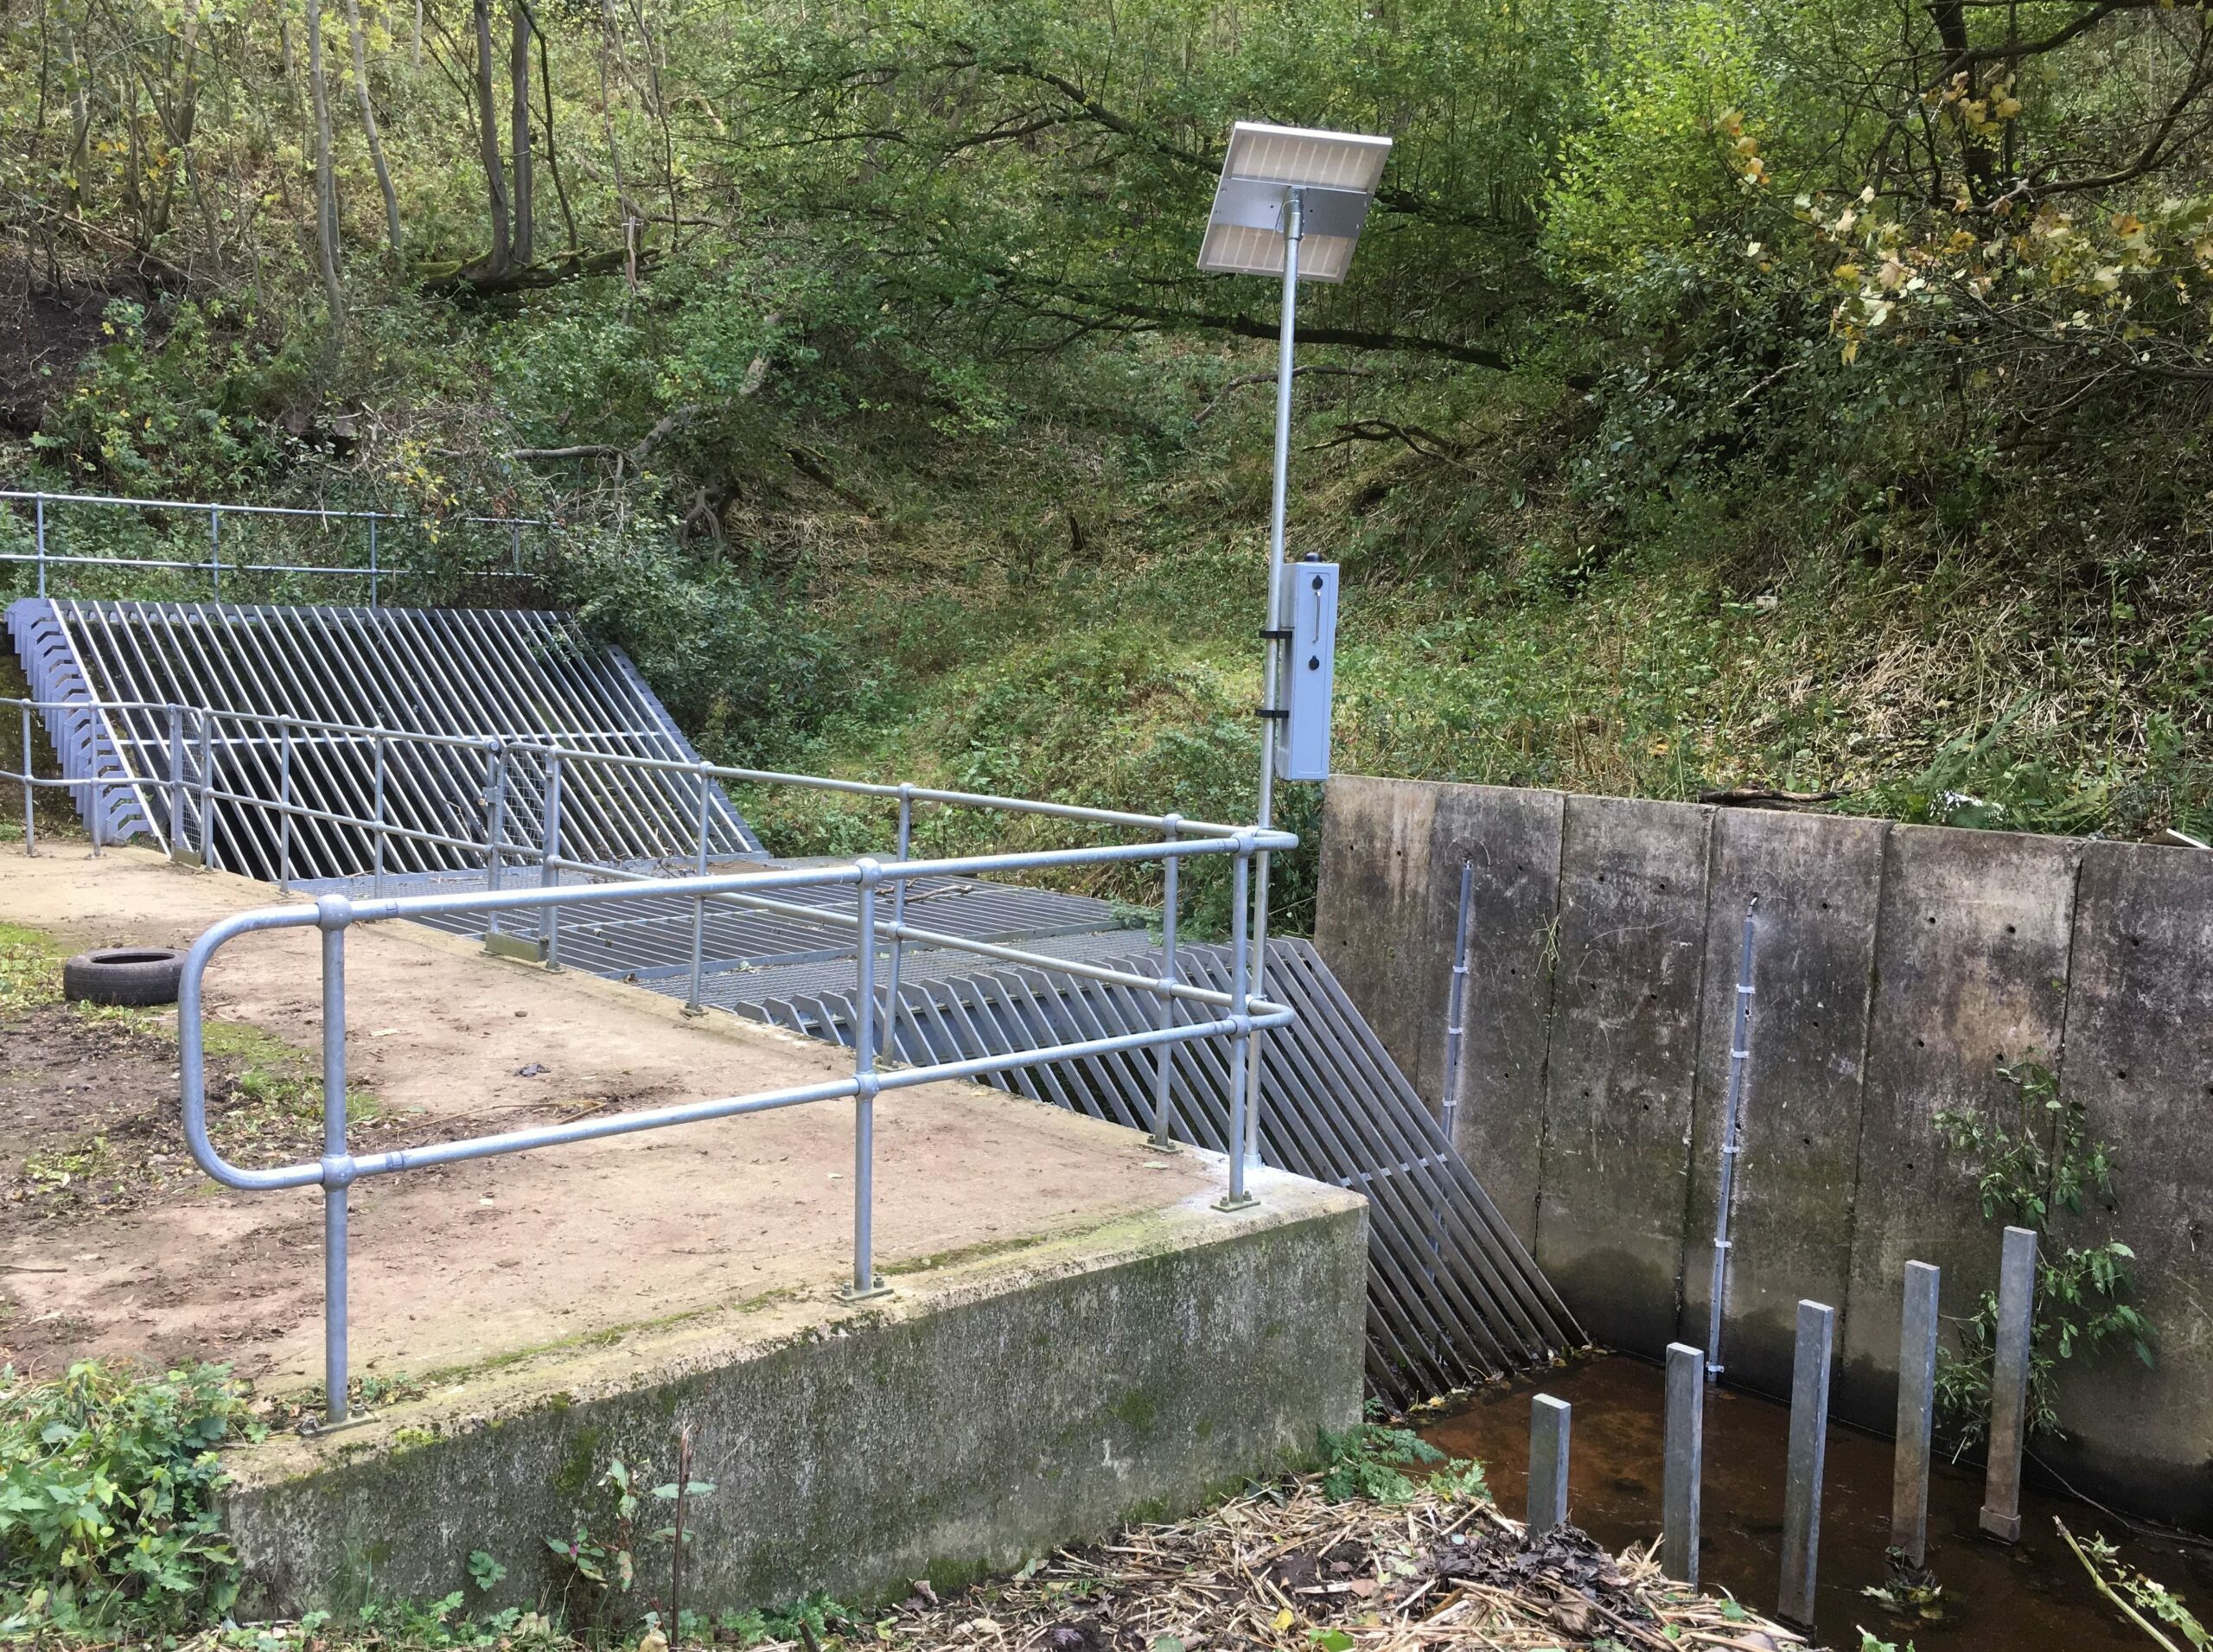 Remote asset monitoring camera installation to view the condition of a trash screen at a culvert which is prone to flooding